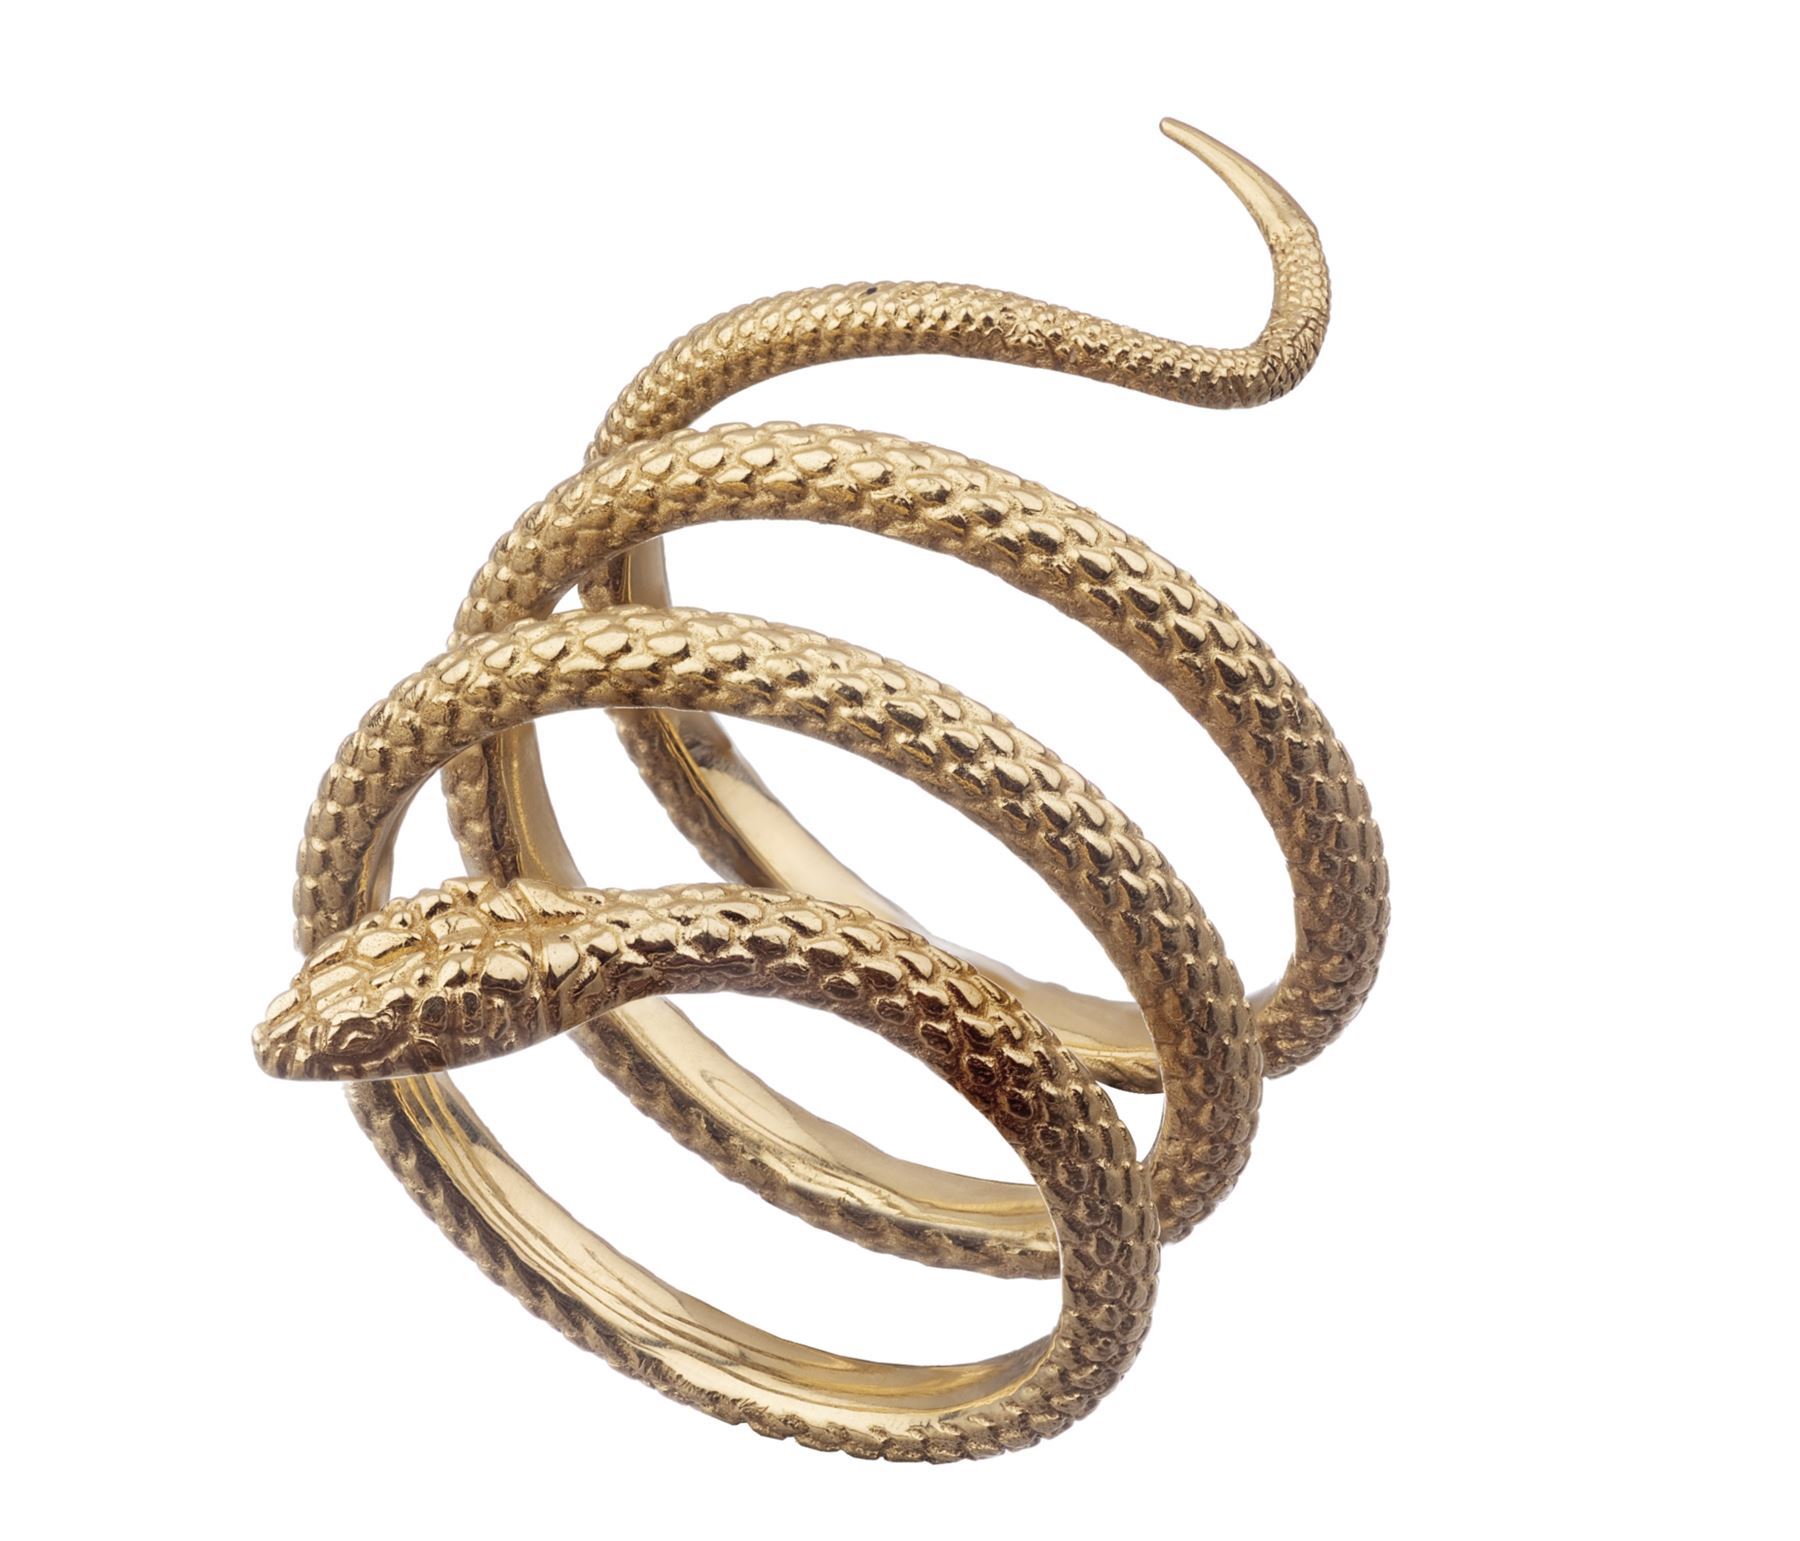 18ct gold textured snake ring - Image 2 of 2